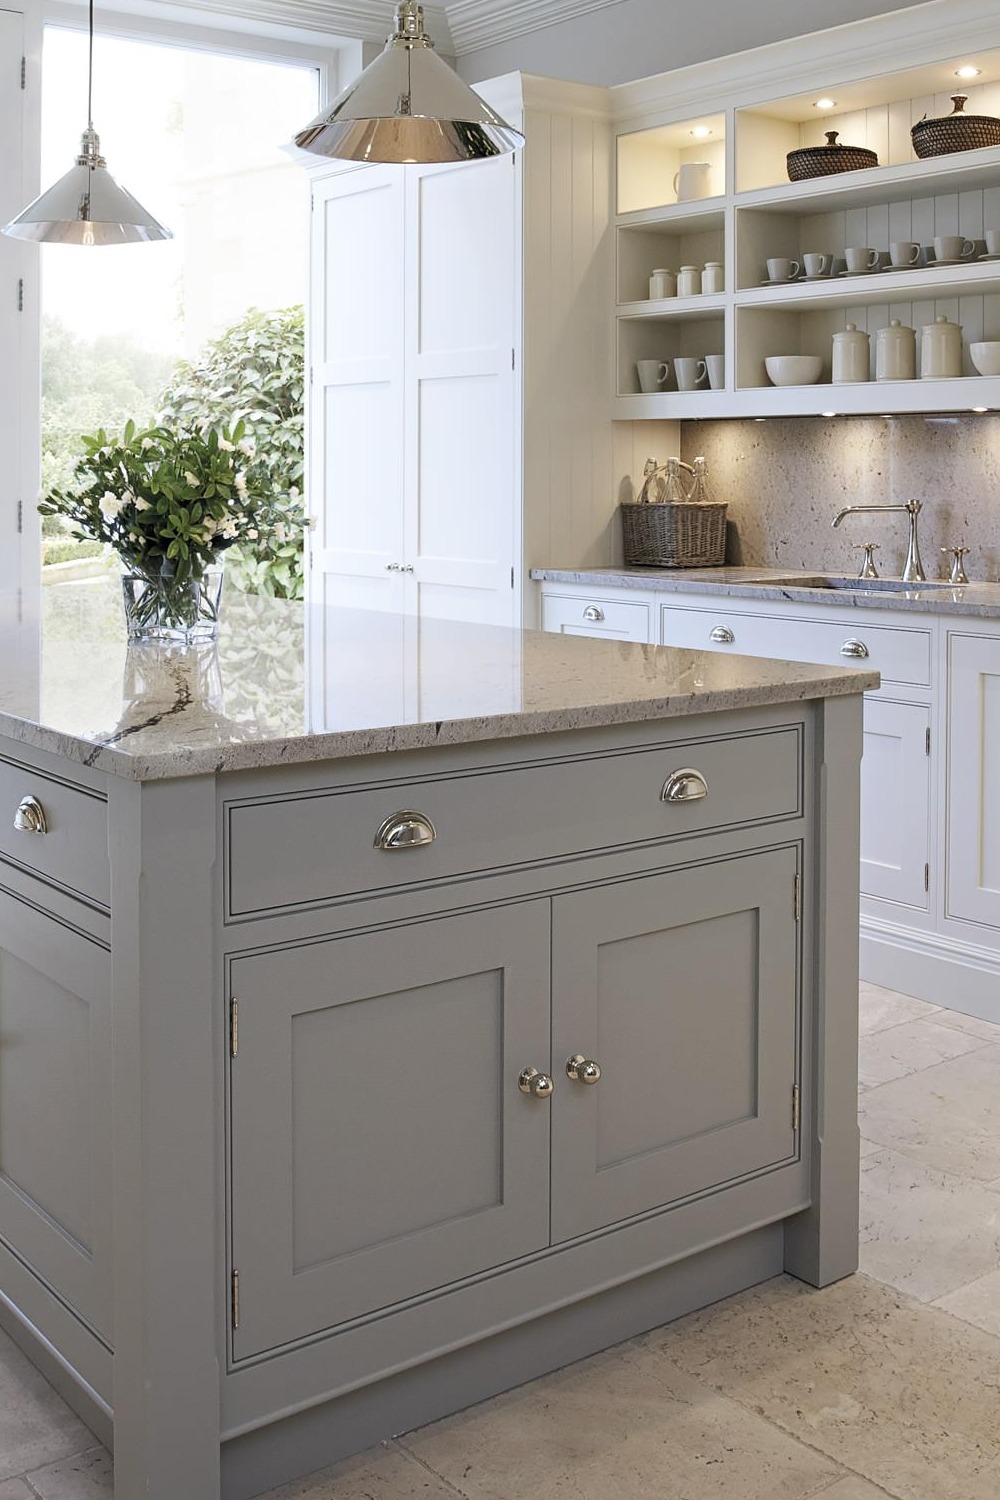 Painted Kitchen Cabinets Painting Cabinets Gray Cabinets White Cabinets Design Bold Walls